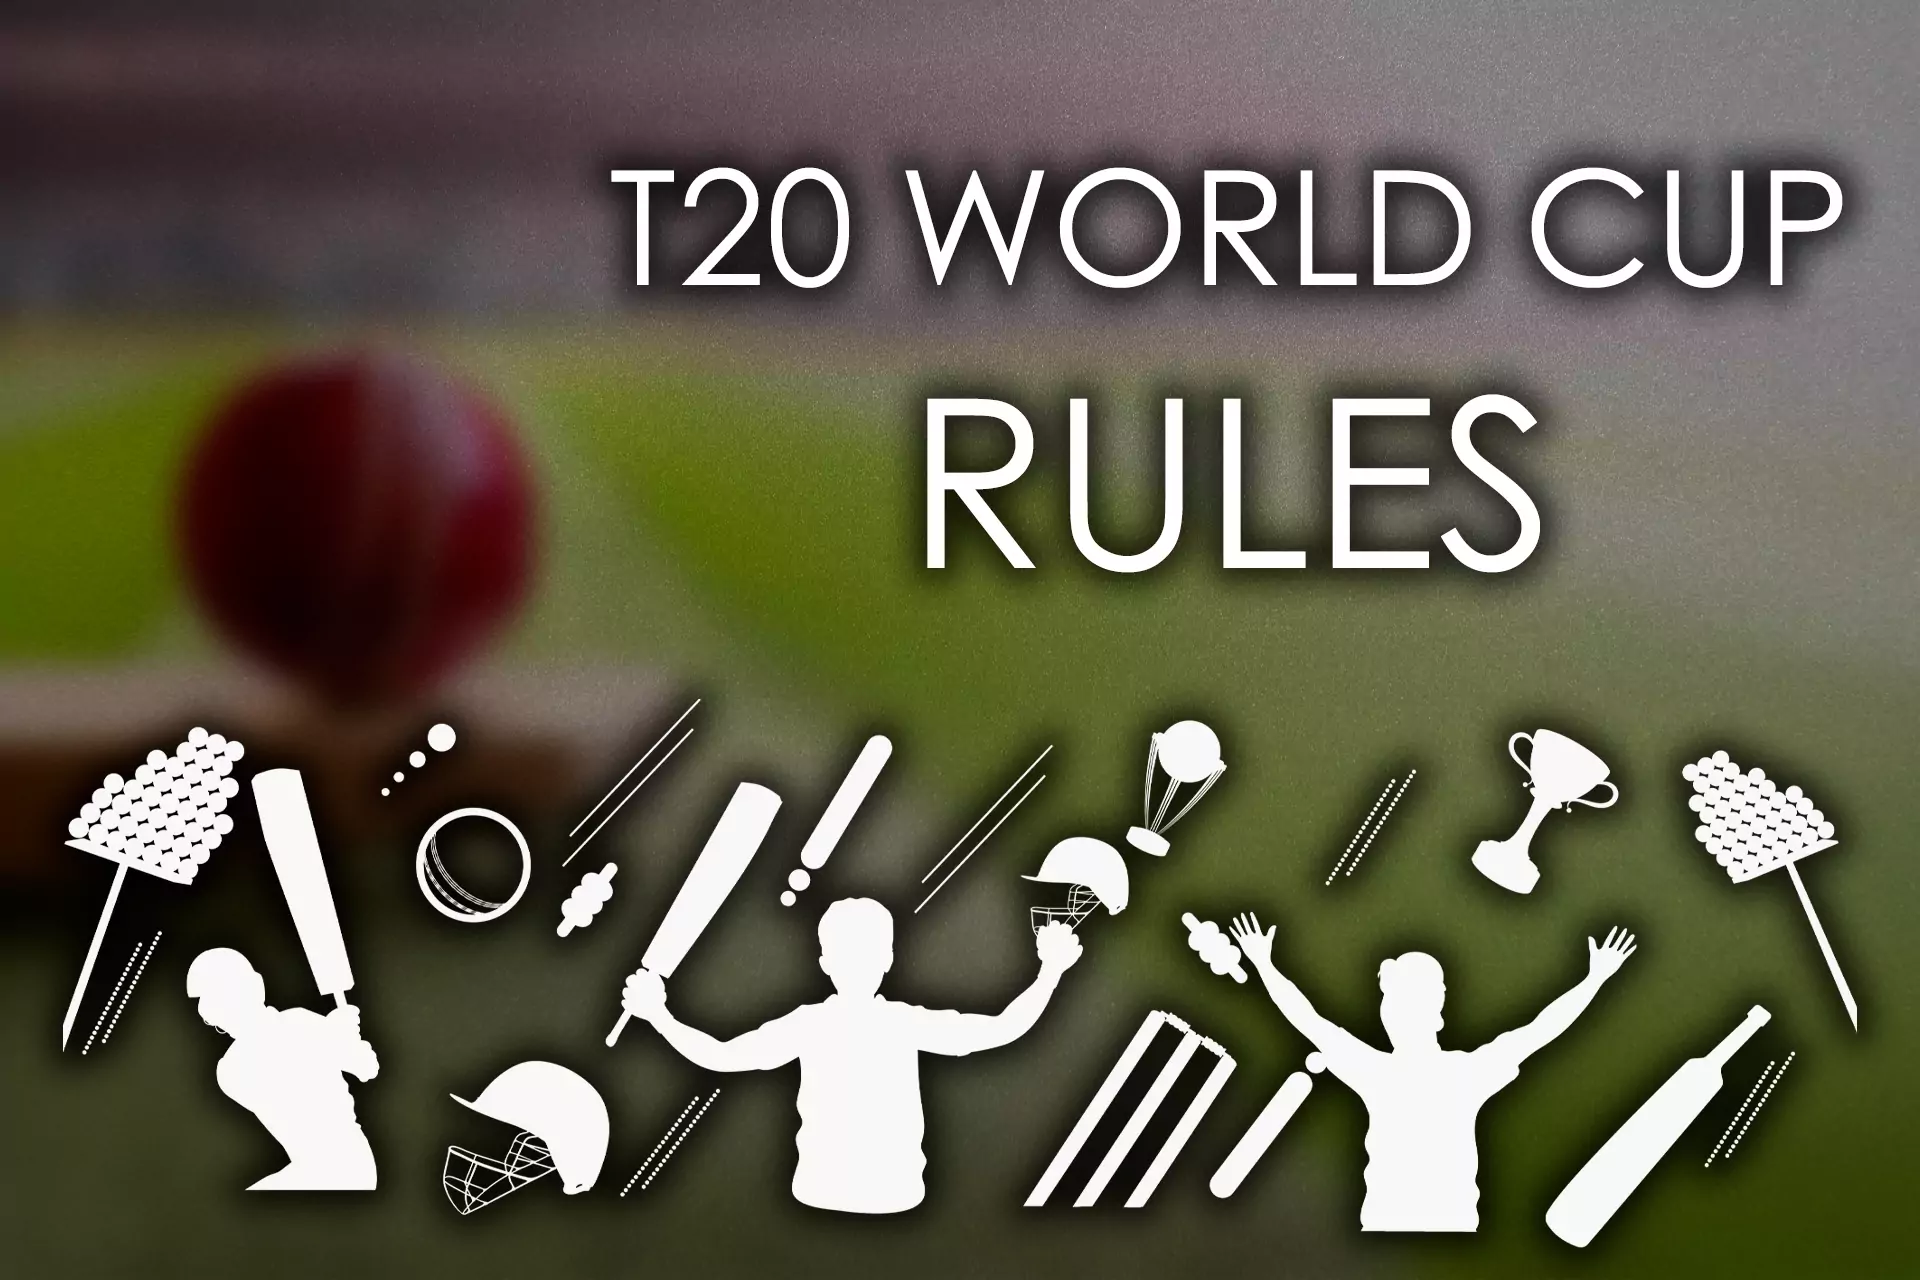 The rules of T20 World Cup are quite close to the common rules of cricket tournaments but there are few differences that T20 has.